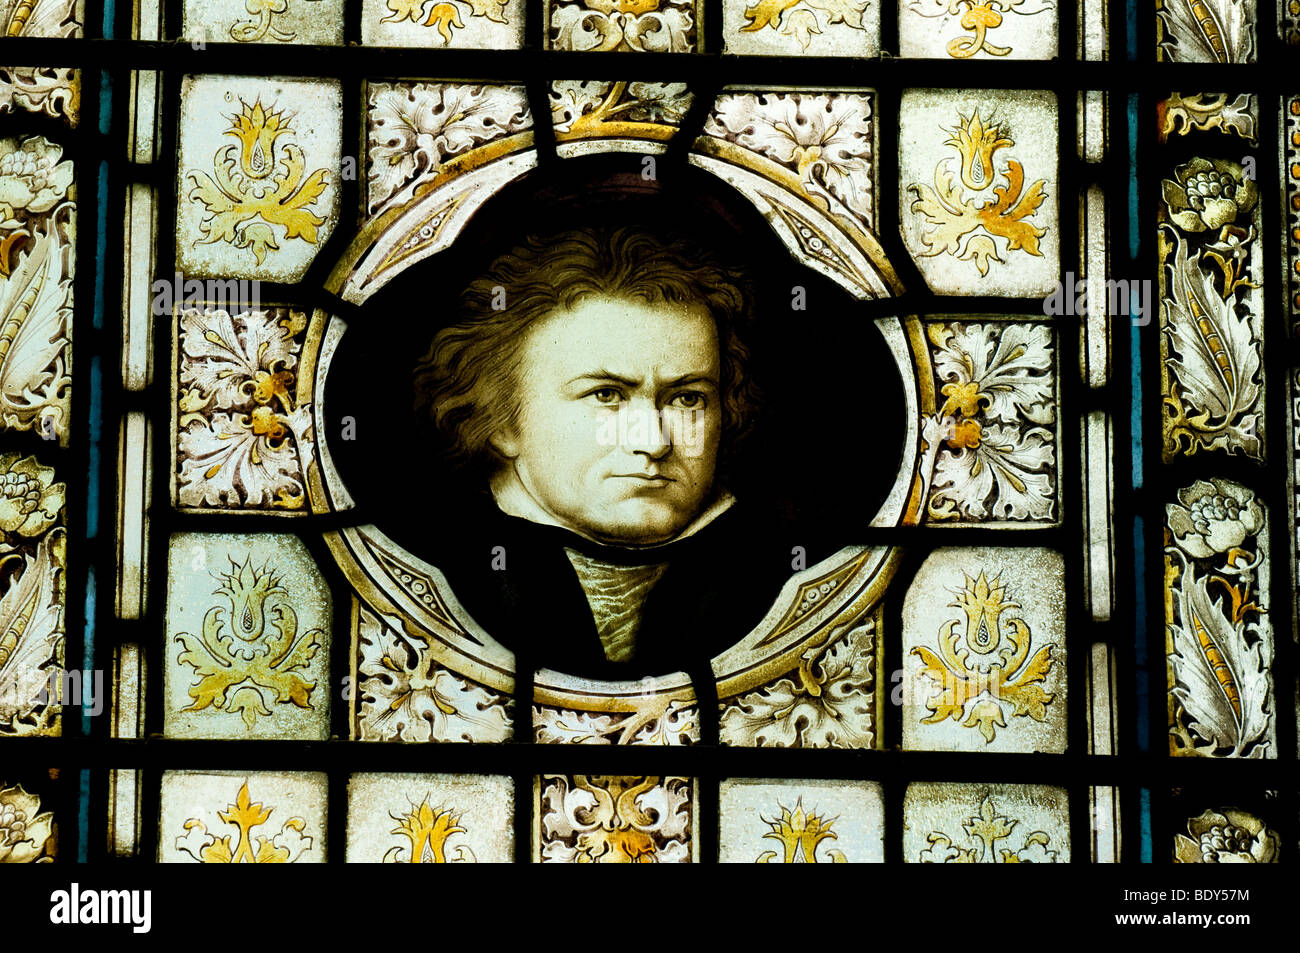 A stained glass window depicting Ludwig van Beethoven. Stock Photo